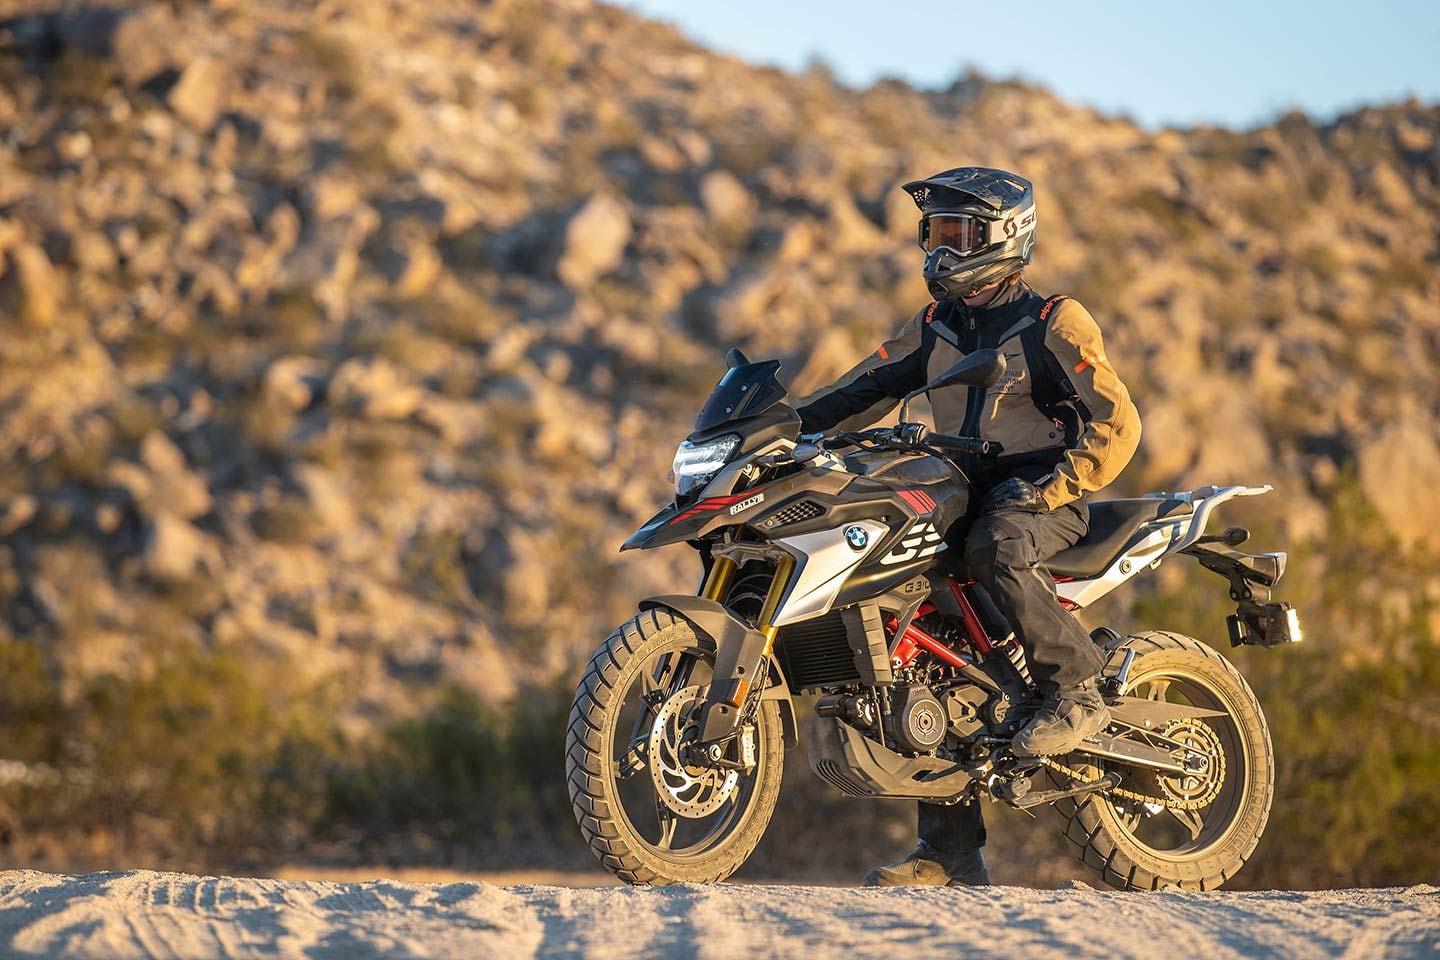 The BMW G 310 GS is not all bark and no bite. For modest off-road adventures, the lightweight ADV will surely get you there.